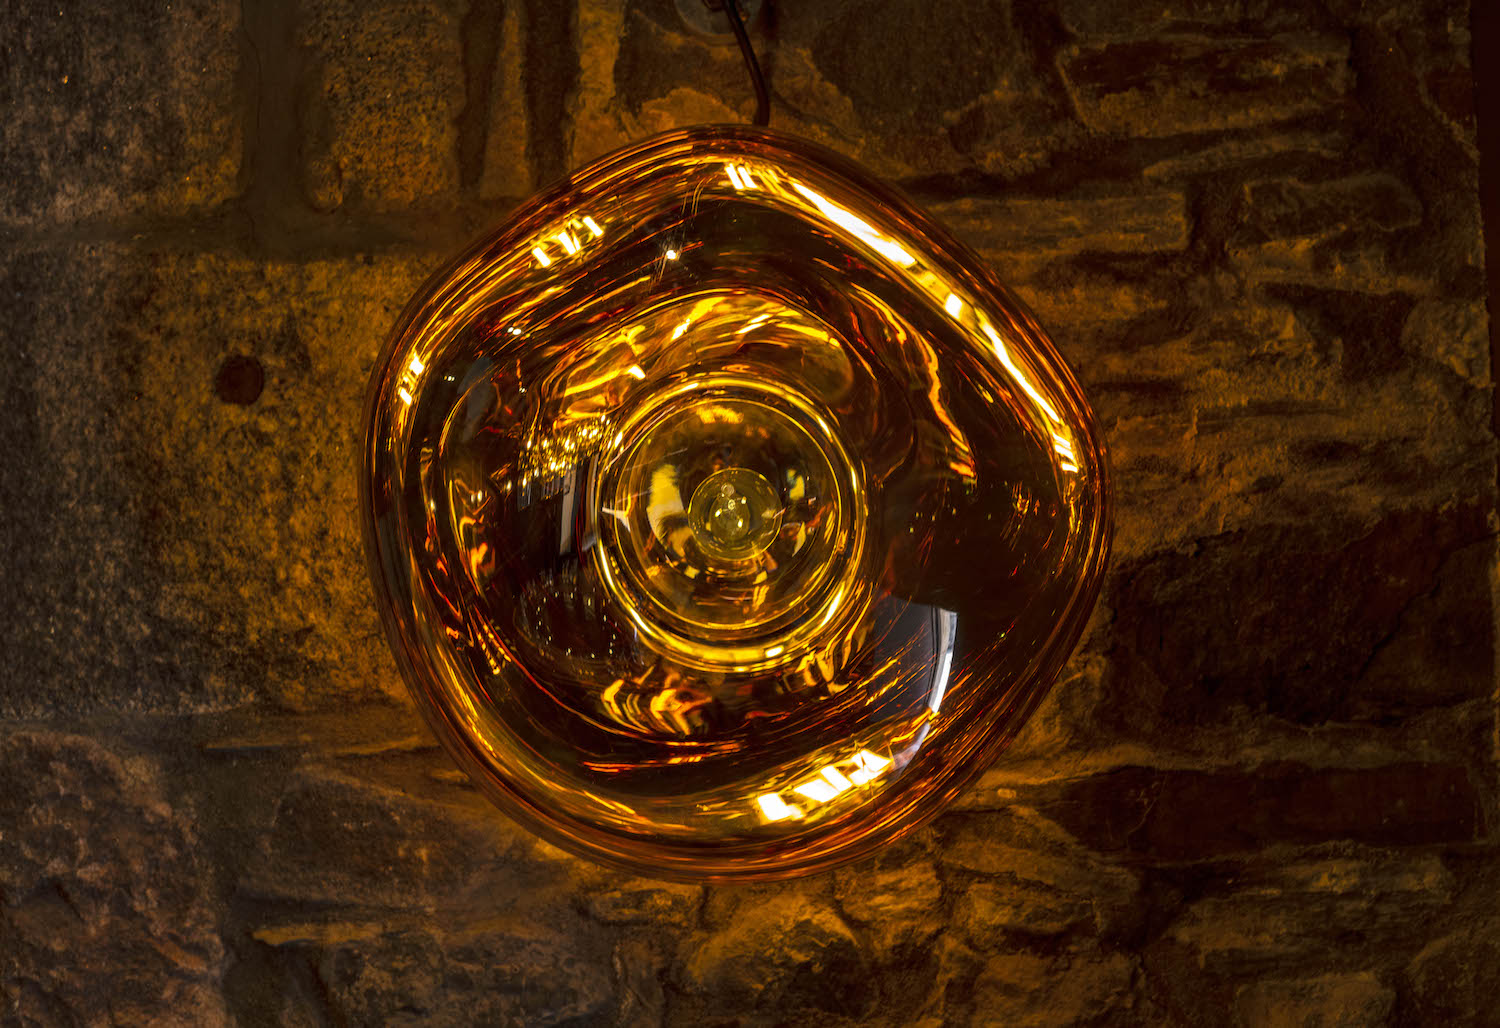 A bottle of
                Glendronach from above